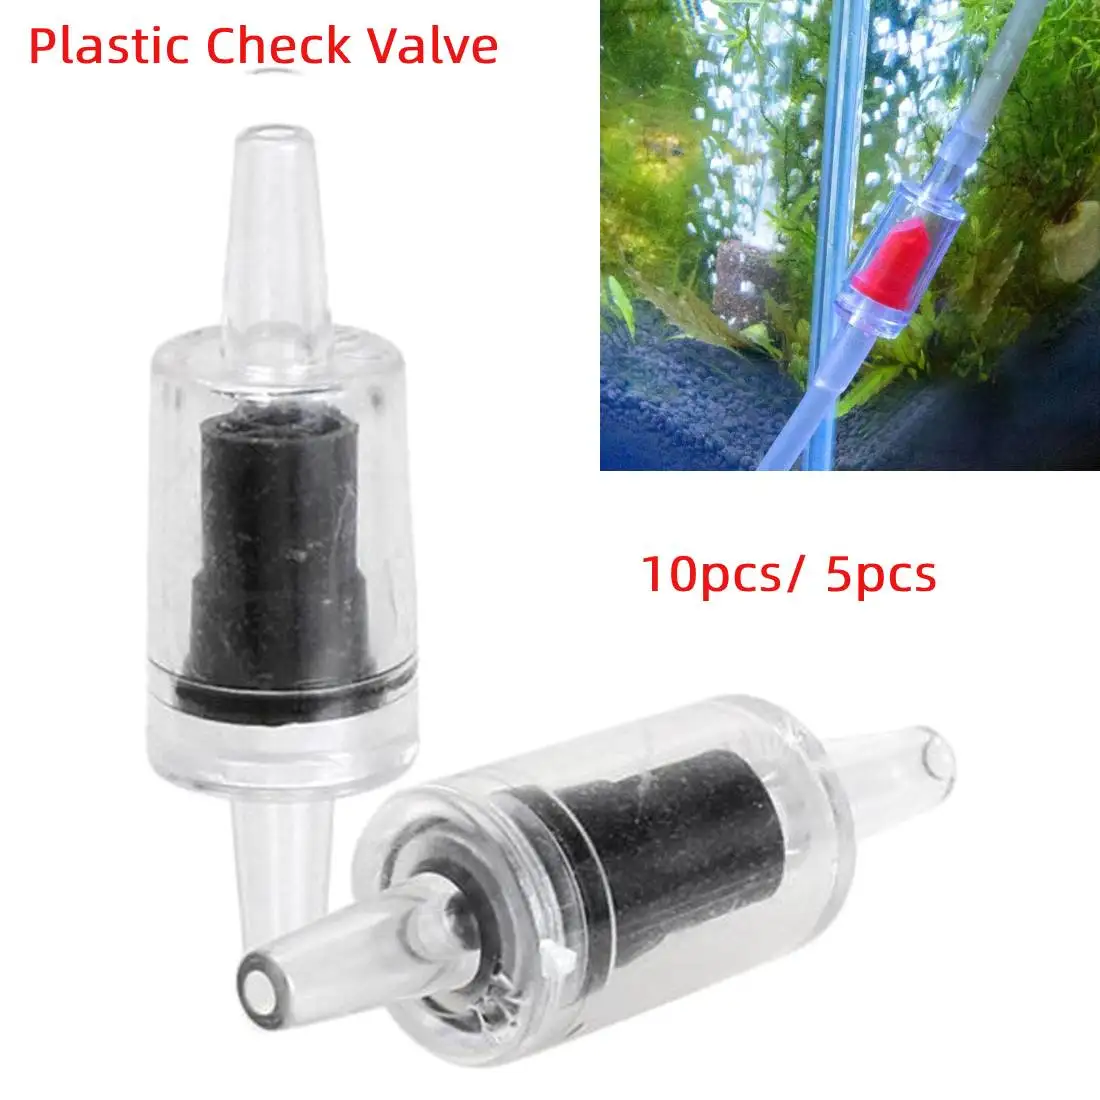 Aquarium One Way Check Valve X1 £0.99 24 HOUR DISPATCH FROM THE UK 